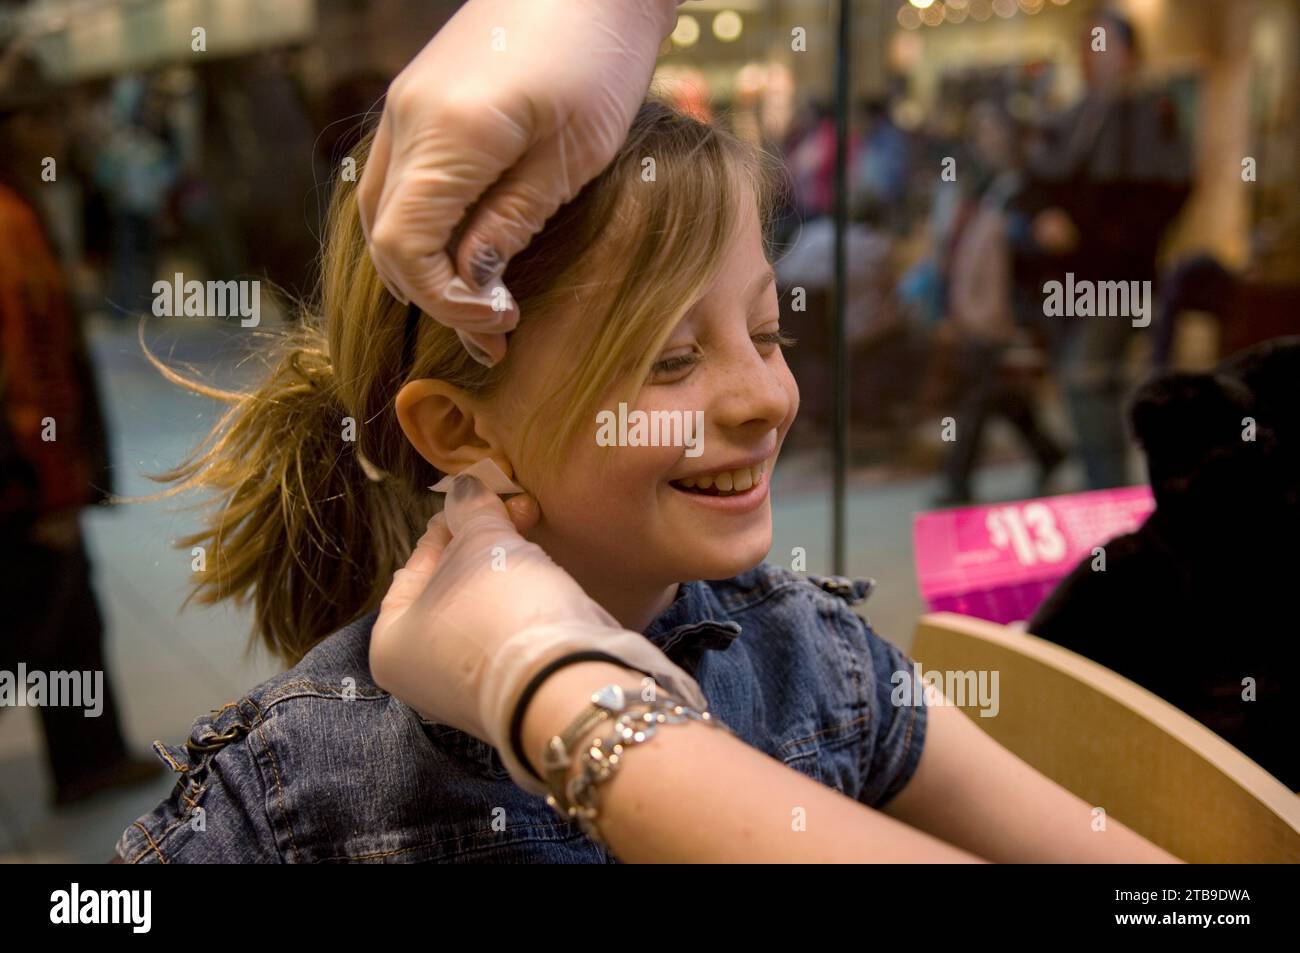 Young girl gets her ears pierced at a mall; Lincoln, Nebraska, United States of America Stock Photo